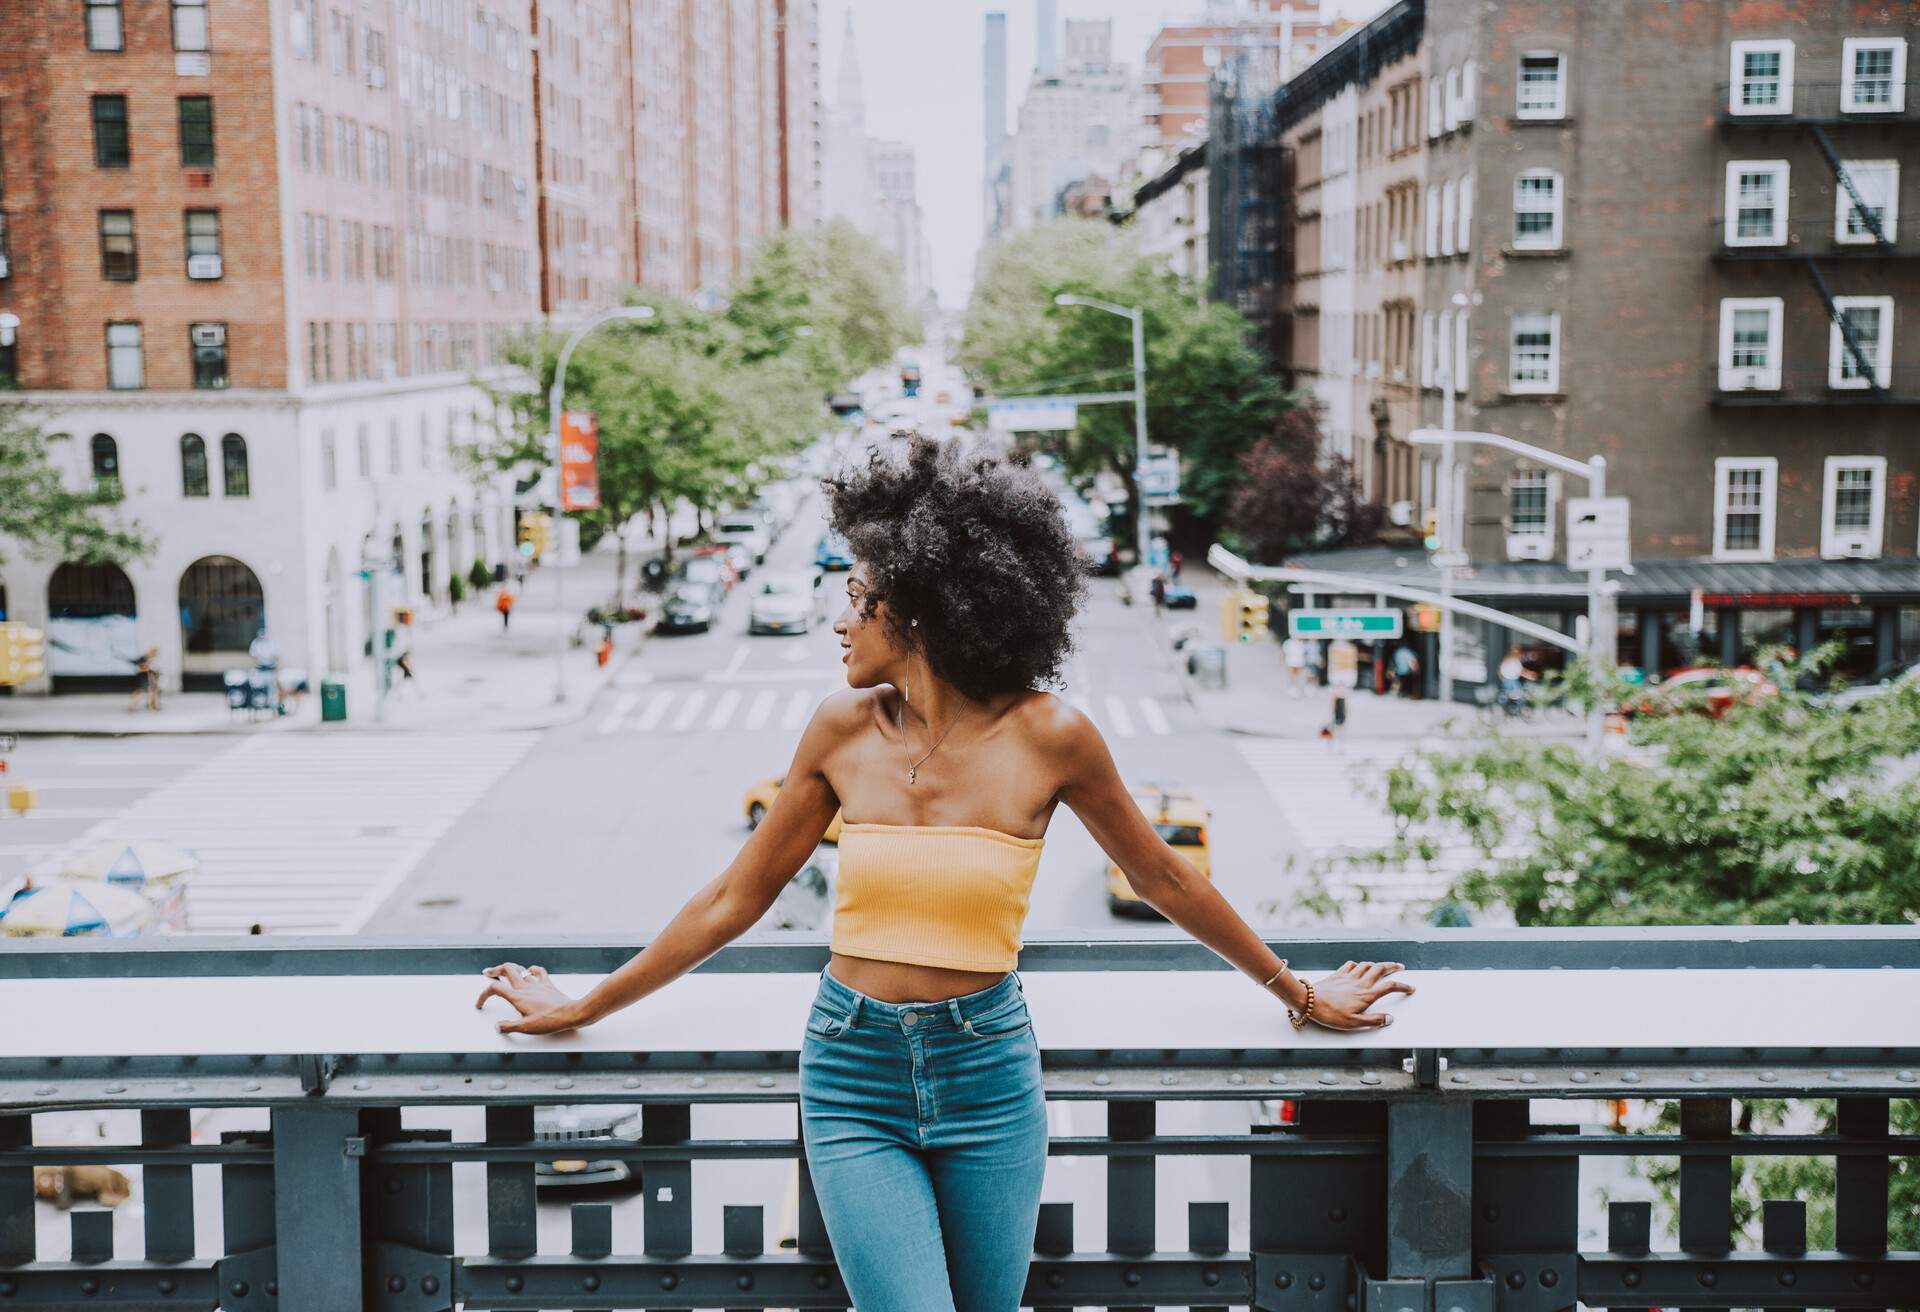 A curly-haired woman in a yellow tube top and denim jeans leans on a bridge railing as she looks sideways.